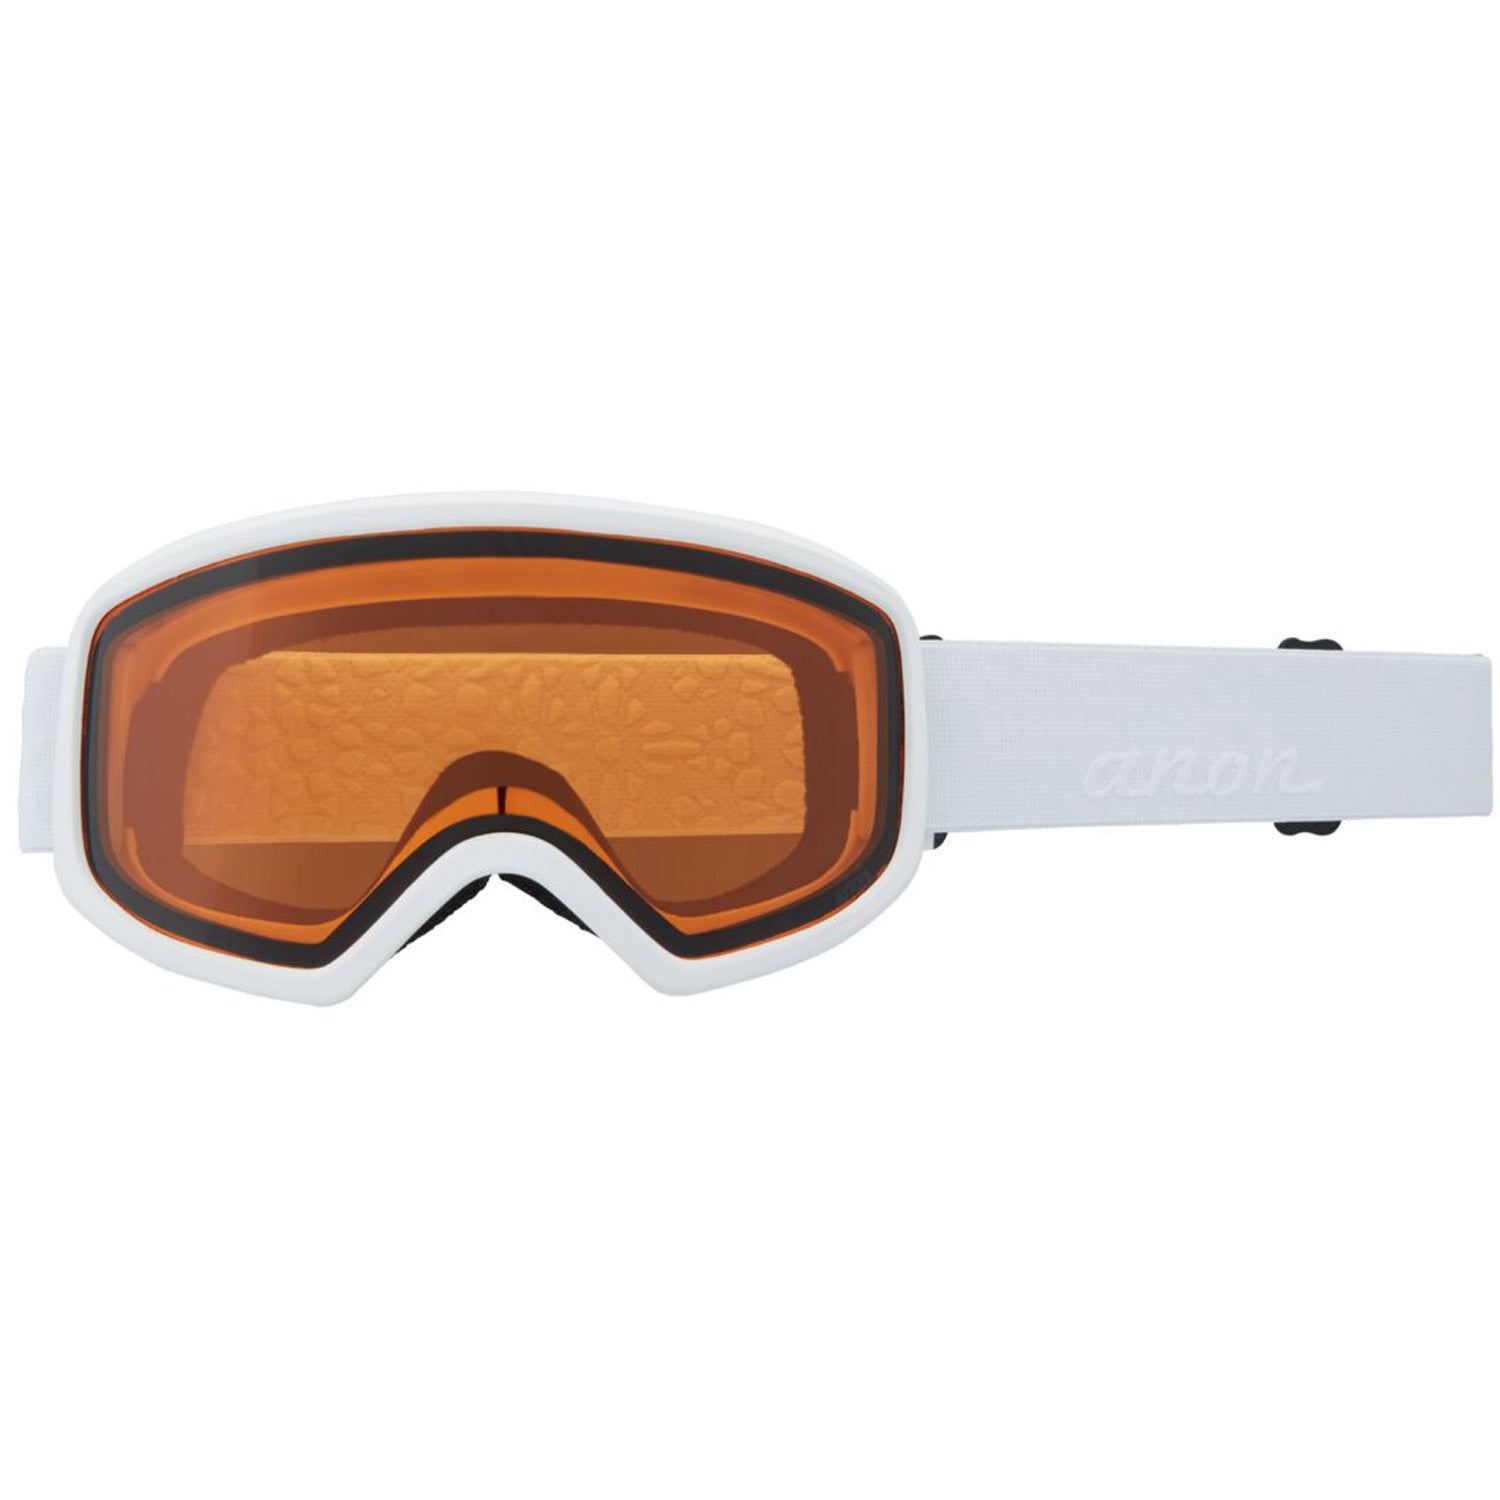 Anon Deringer Goggle 2021 White - Perceive Cloudy Pink Lens w/ Amber Lens